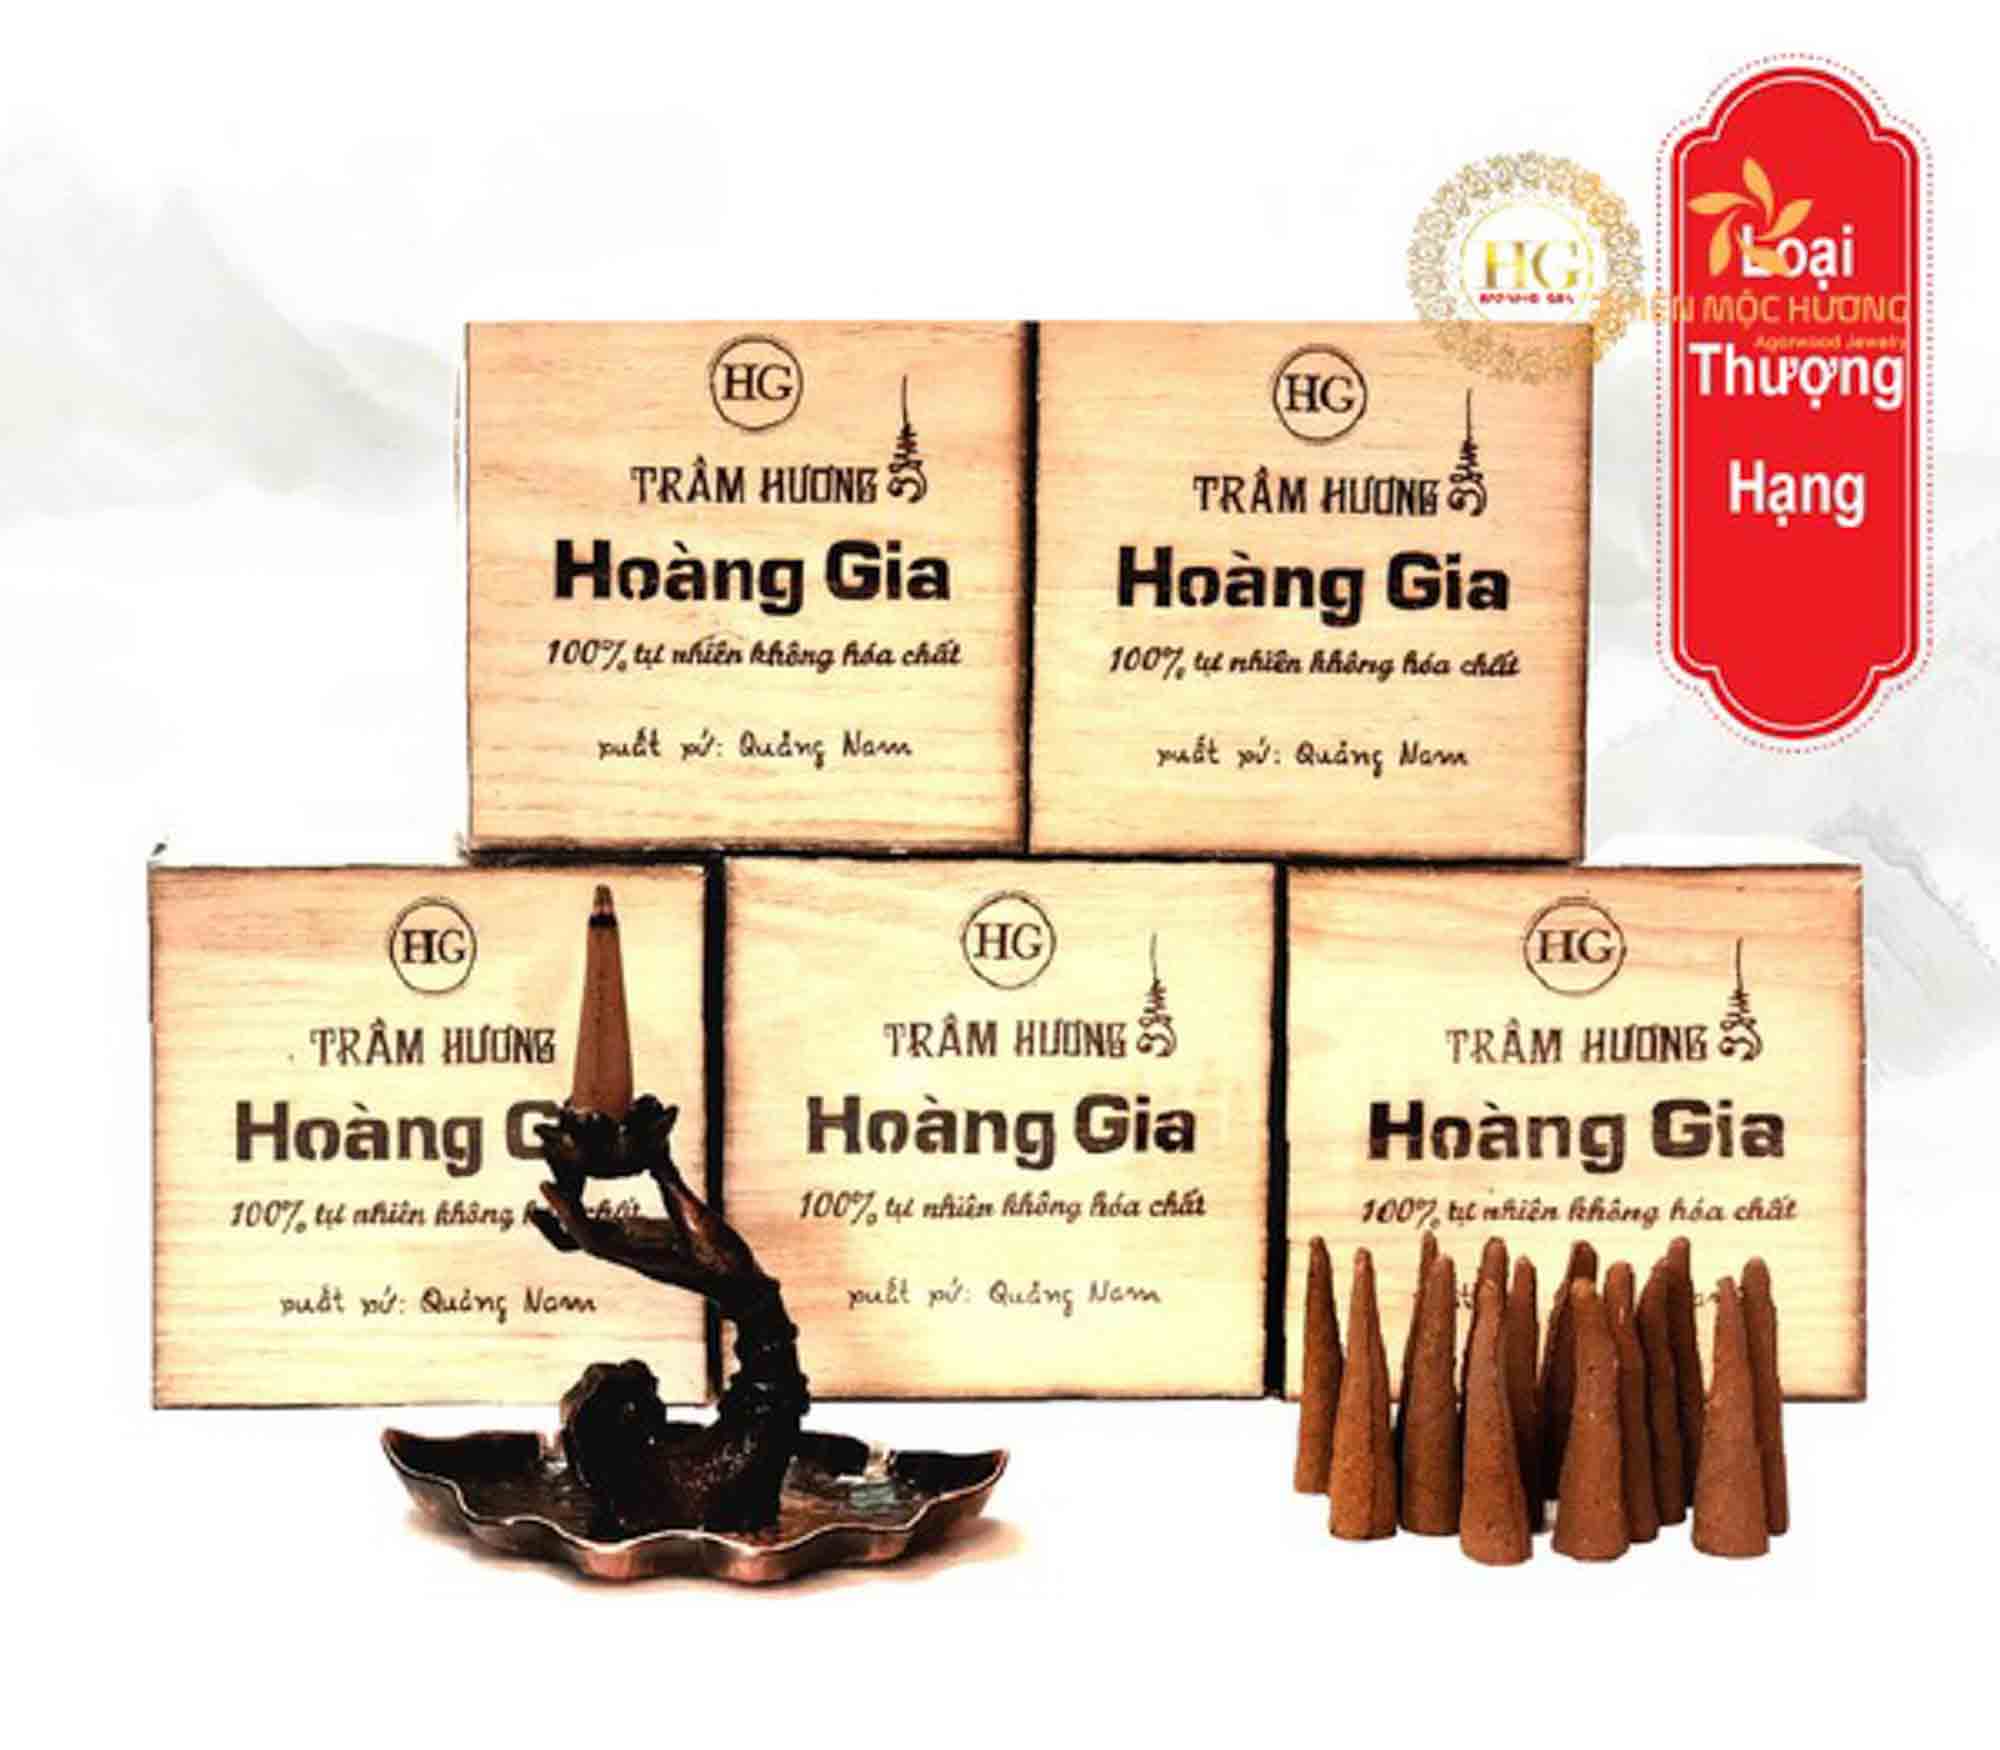 Where to buy the best agarwood in Ho Chi Minh city - Royal Agarwood